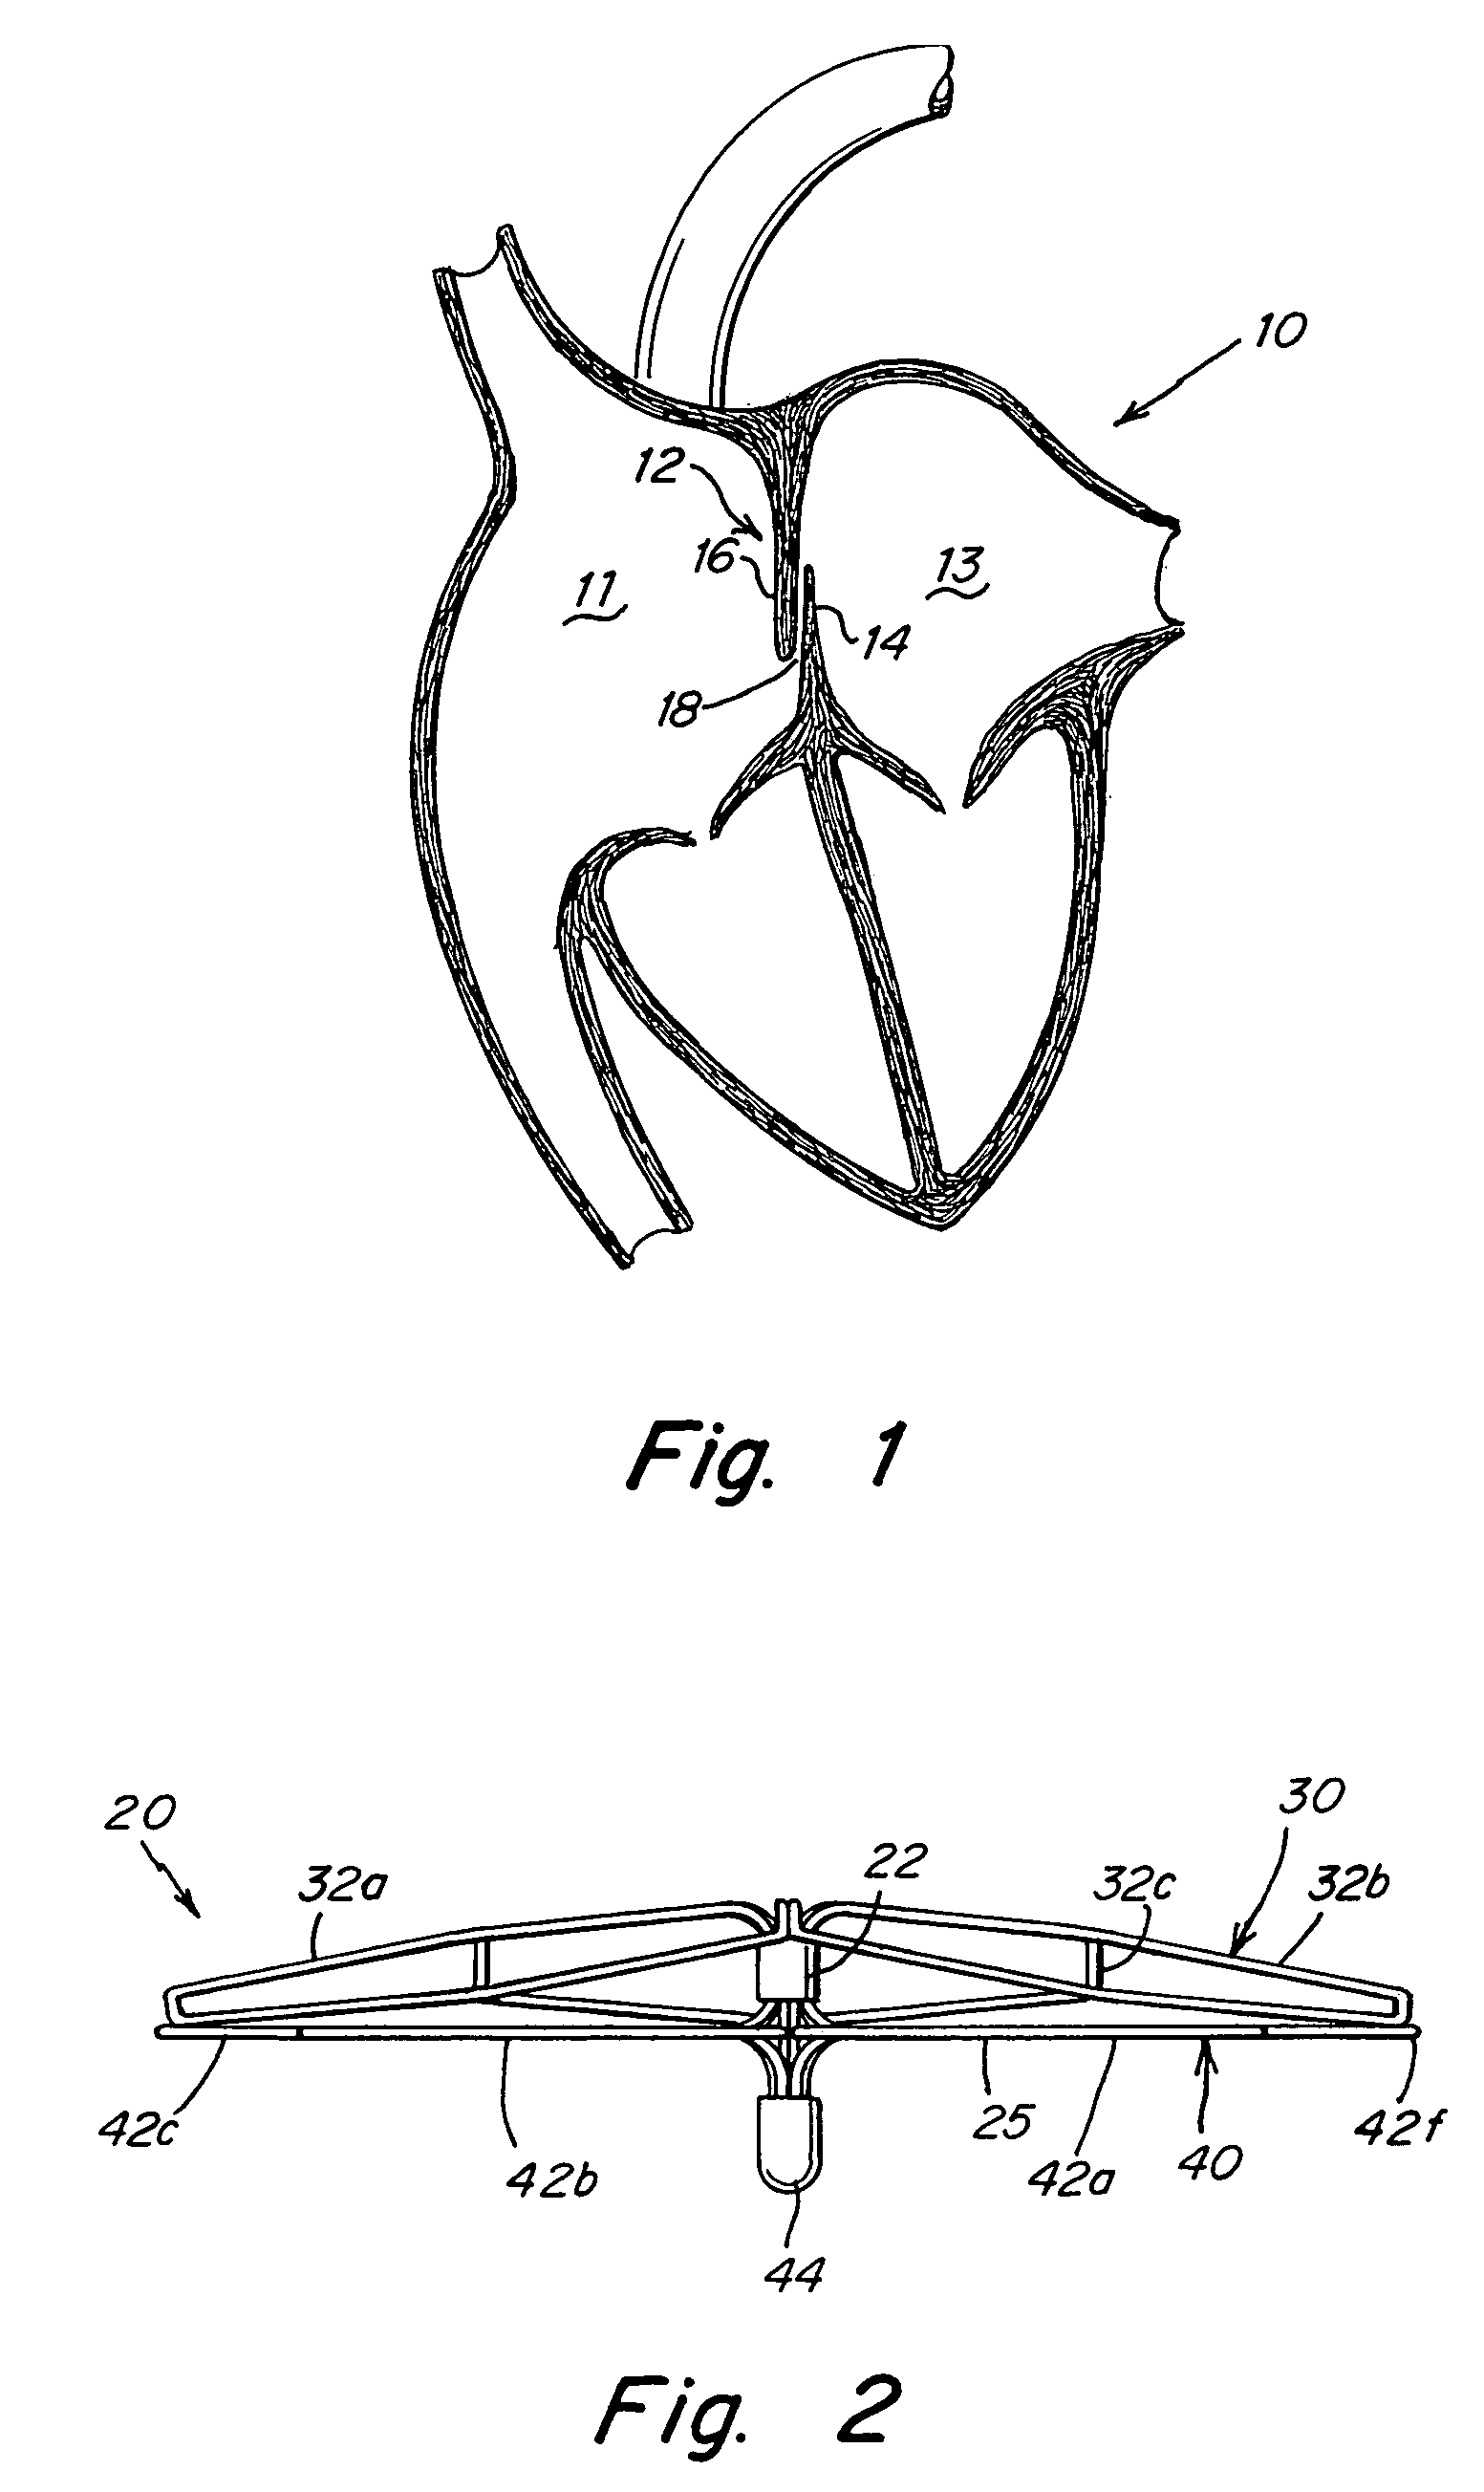 Patent foramen ovale (PFO) closure device with radial and circumferential support